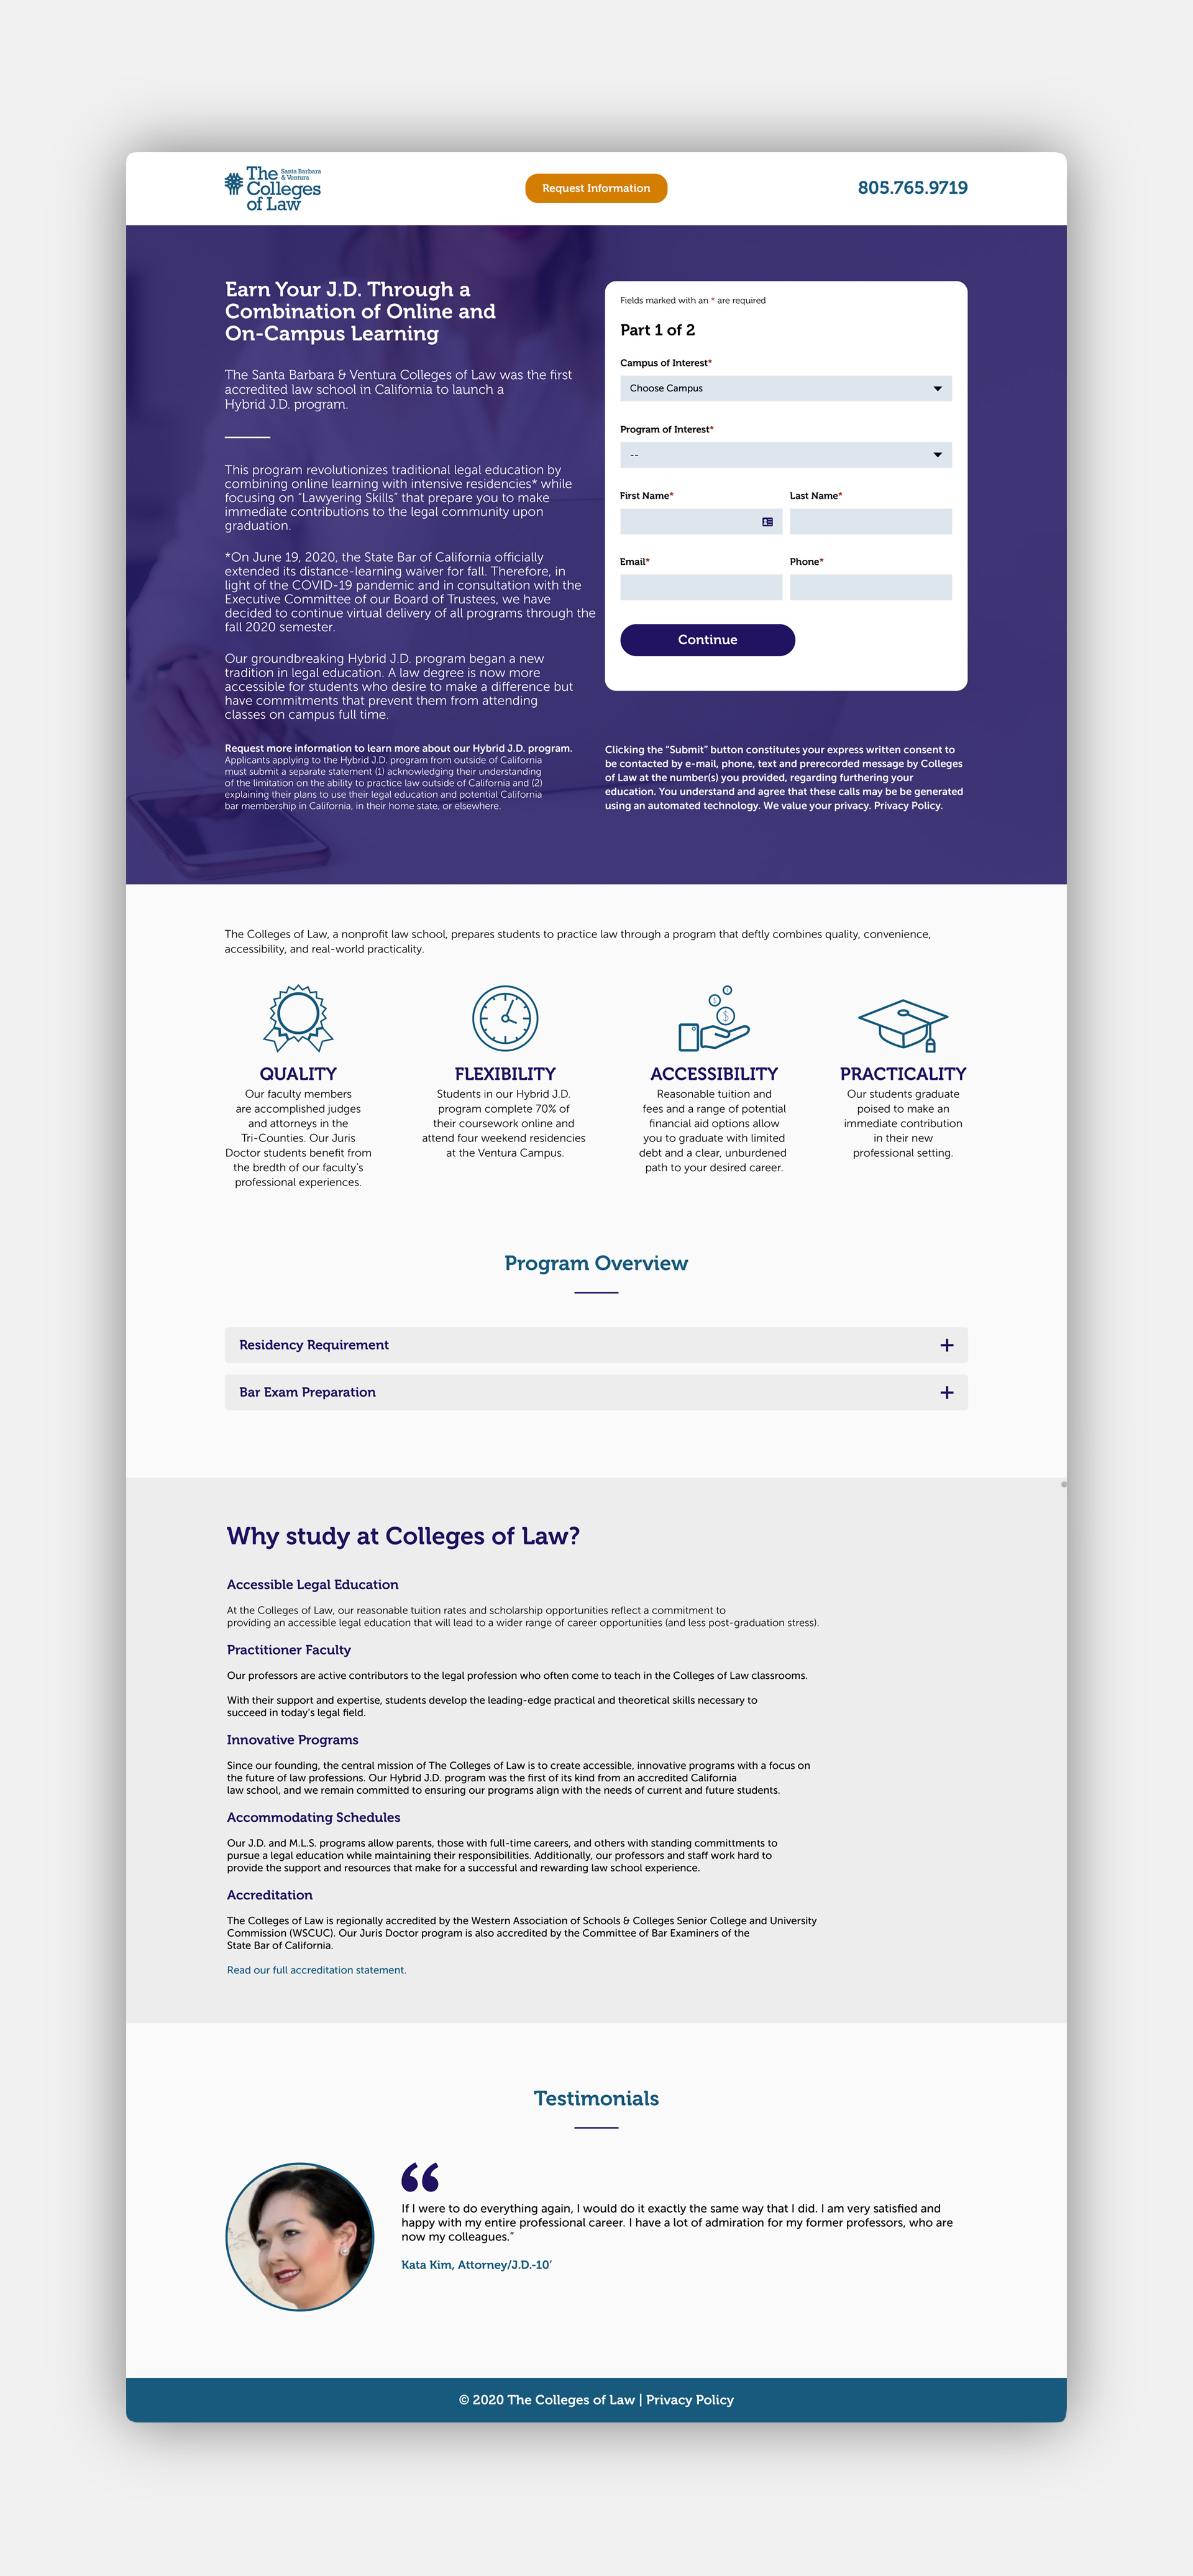 Colleges of Law Paid Landing Page Mockup